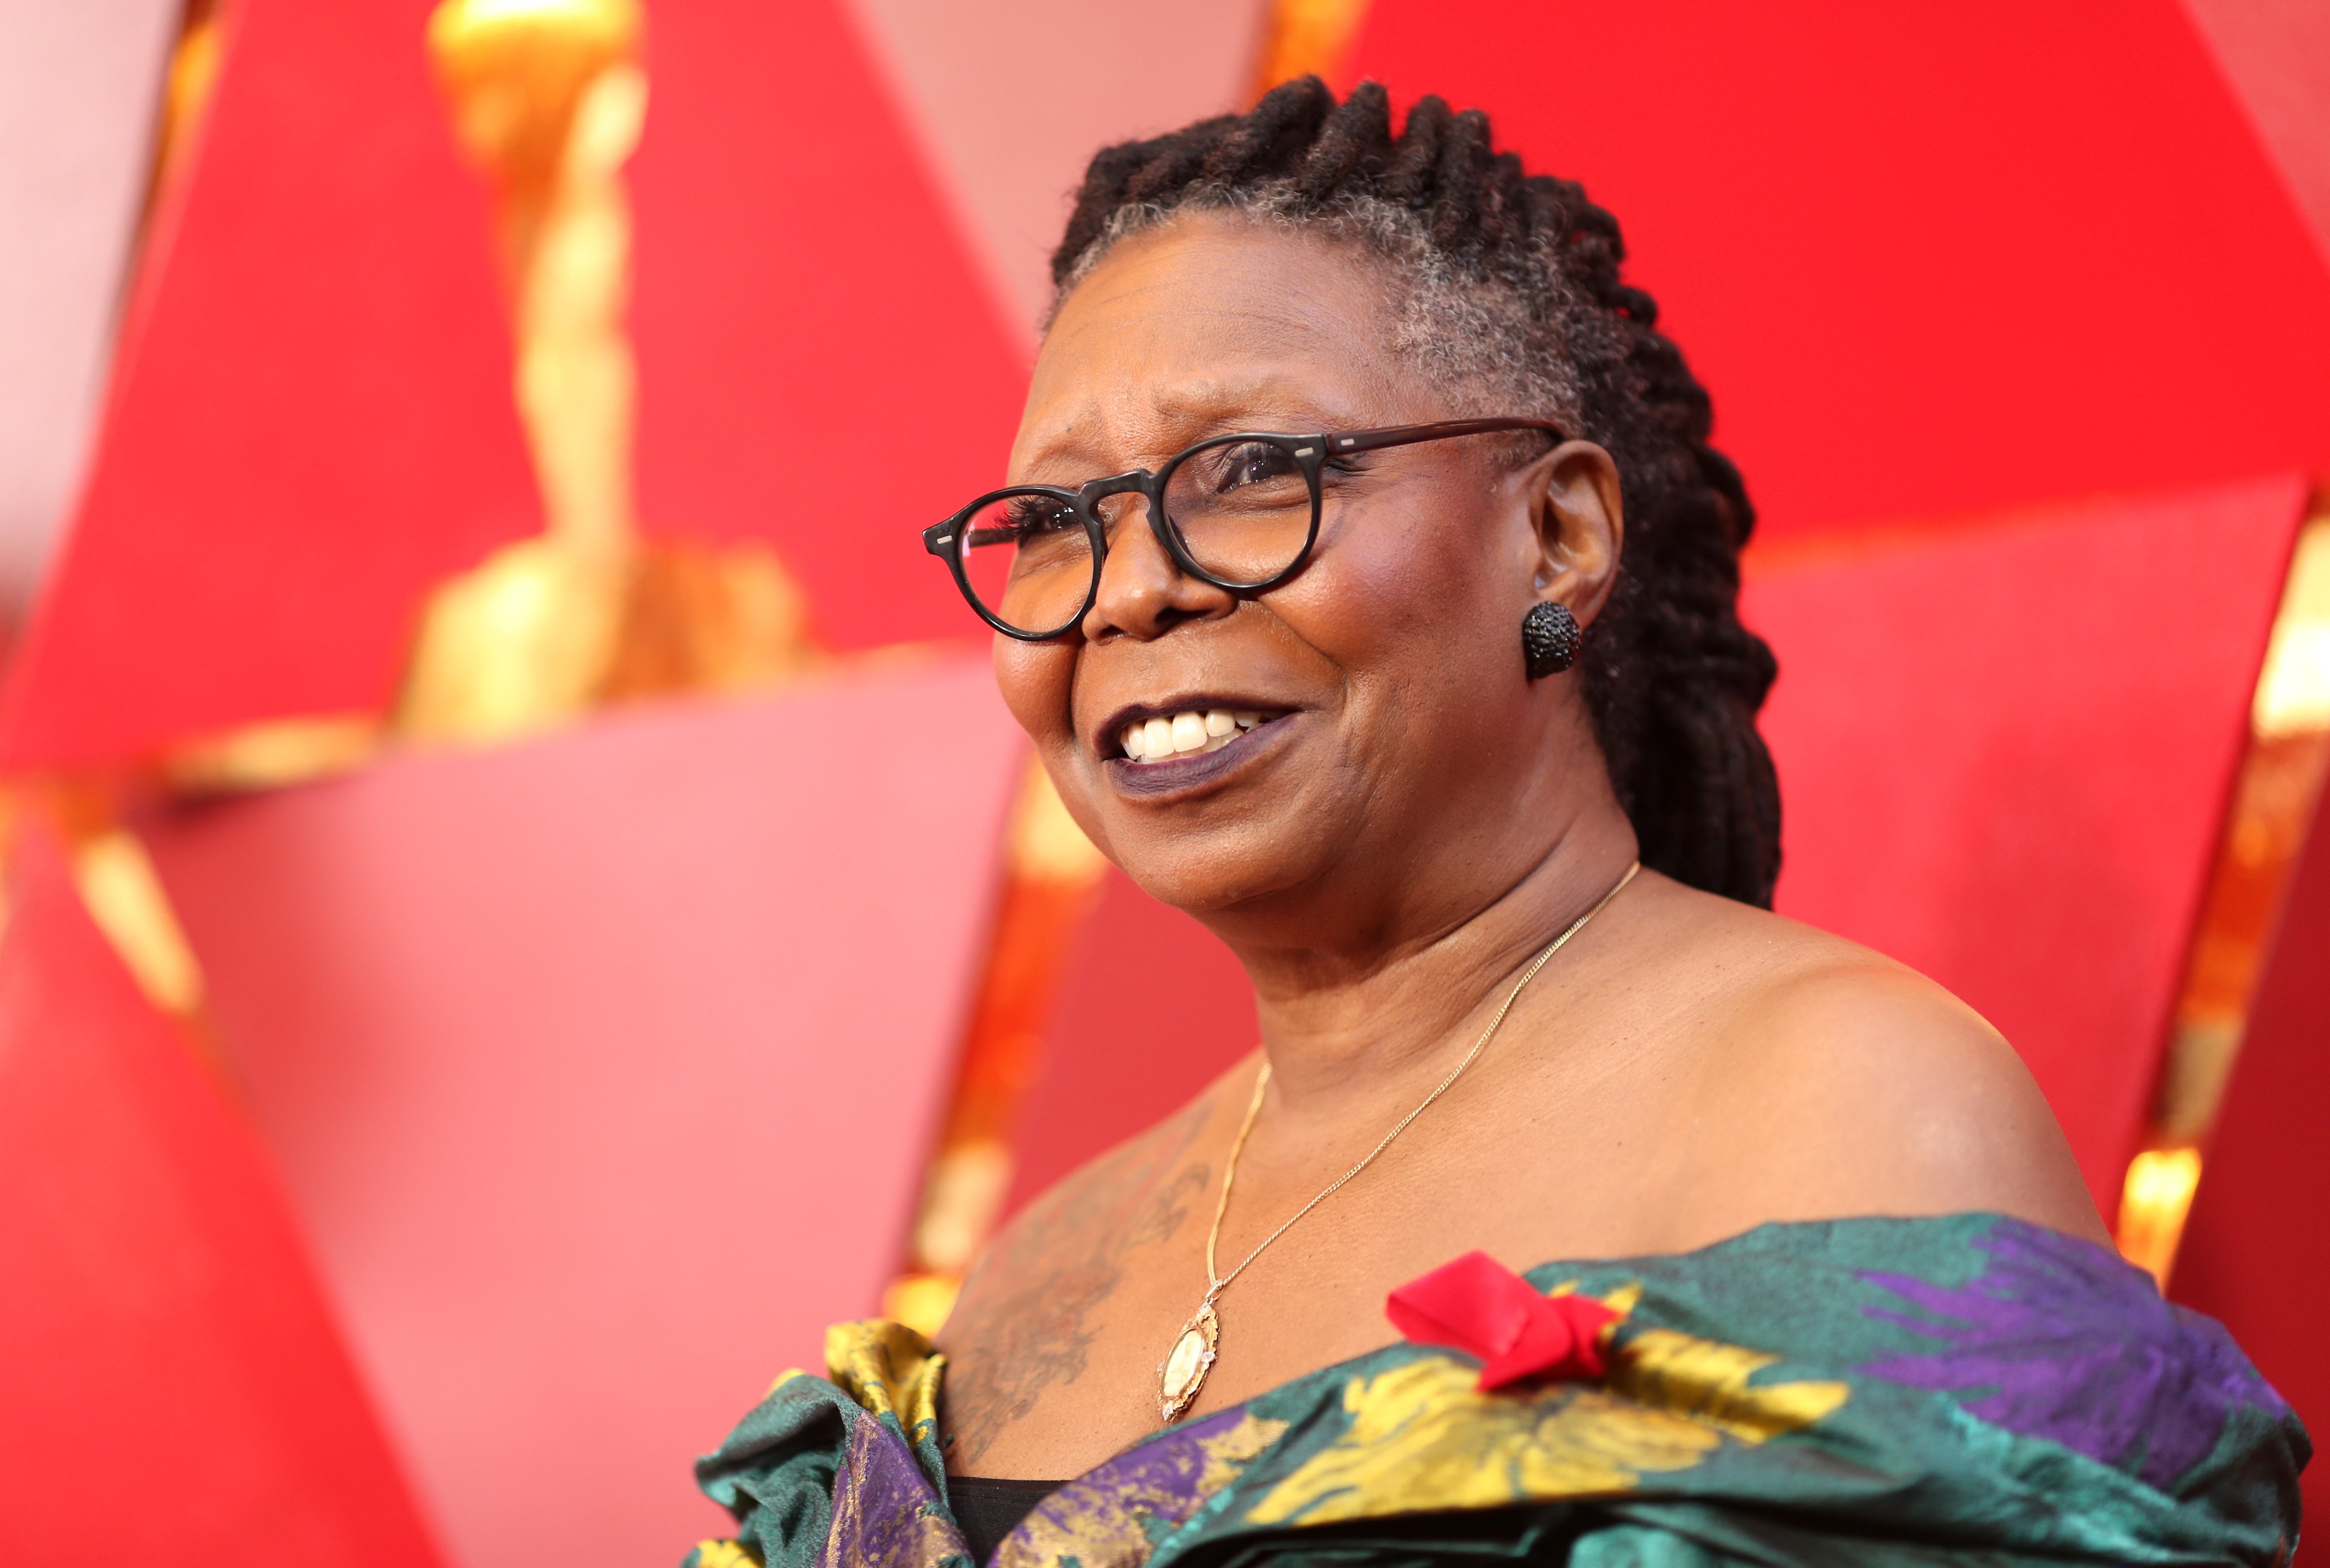 Whoopi Goldberg at the 90th Annual Academy Awards in March 2018. | Photo: Getty Images